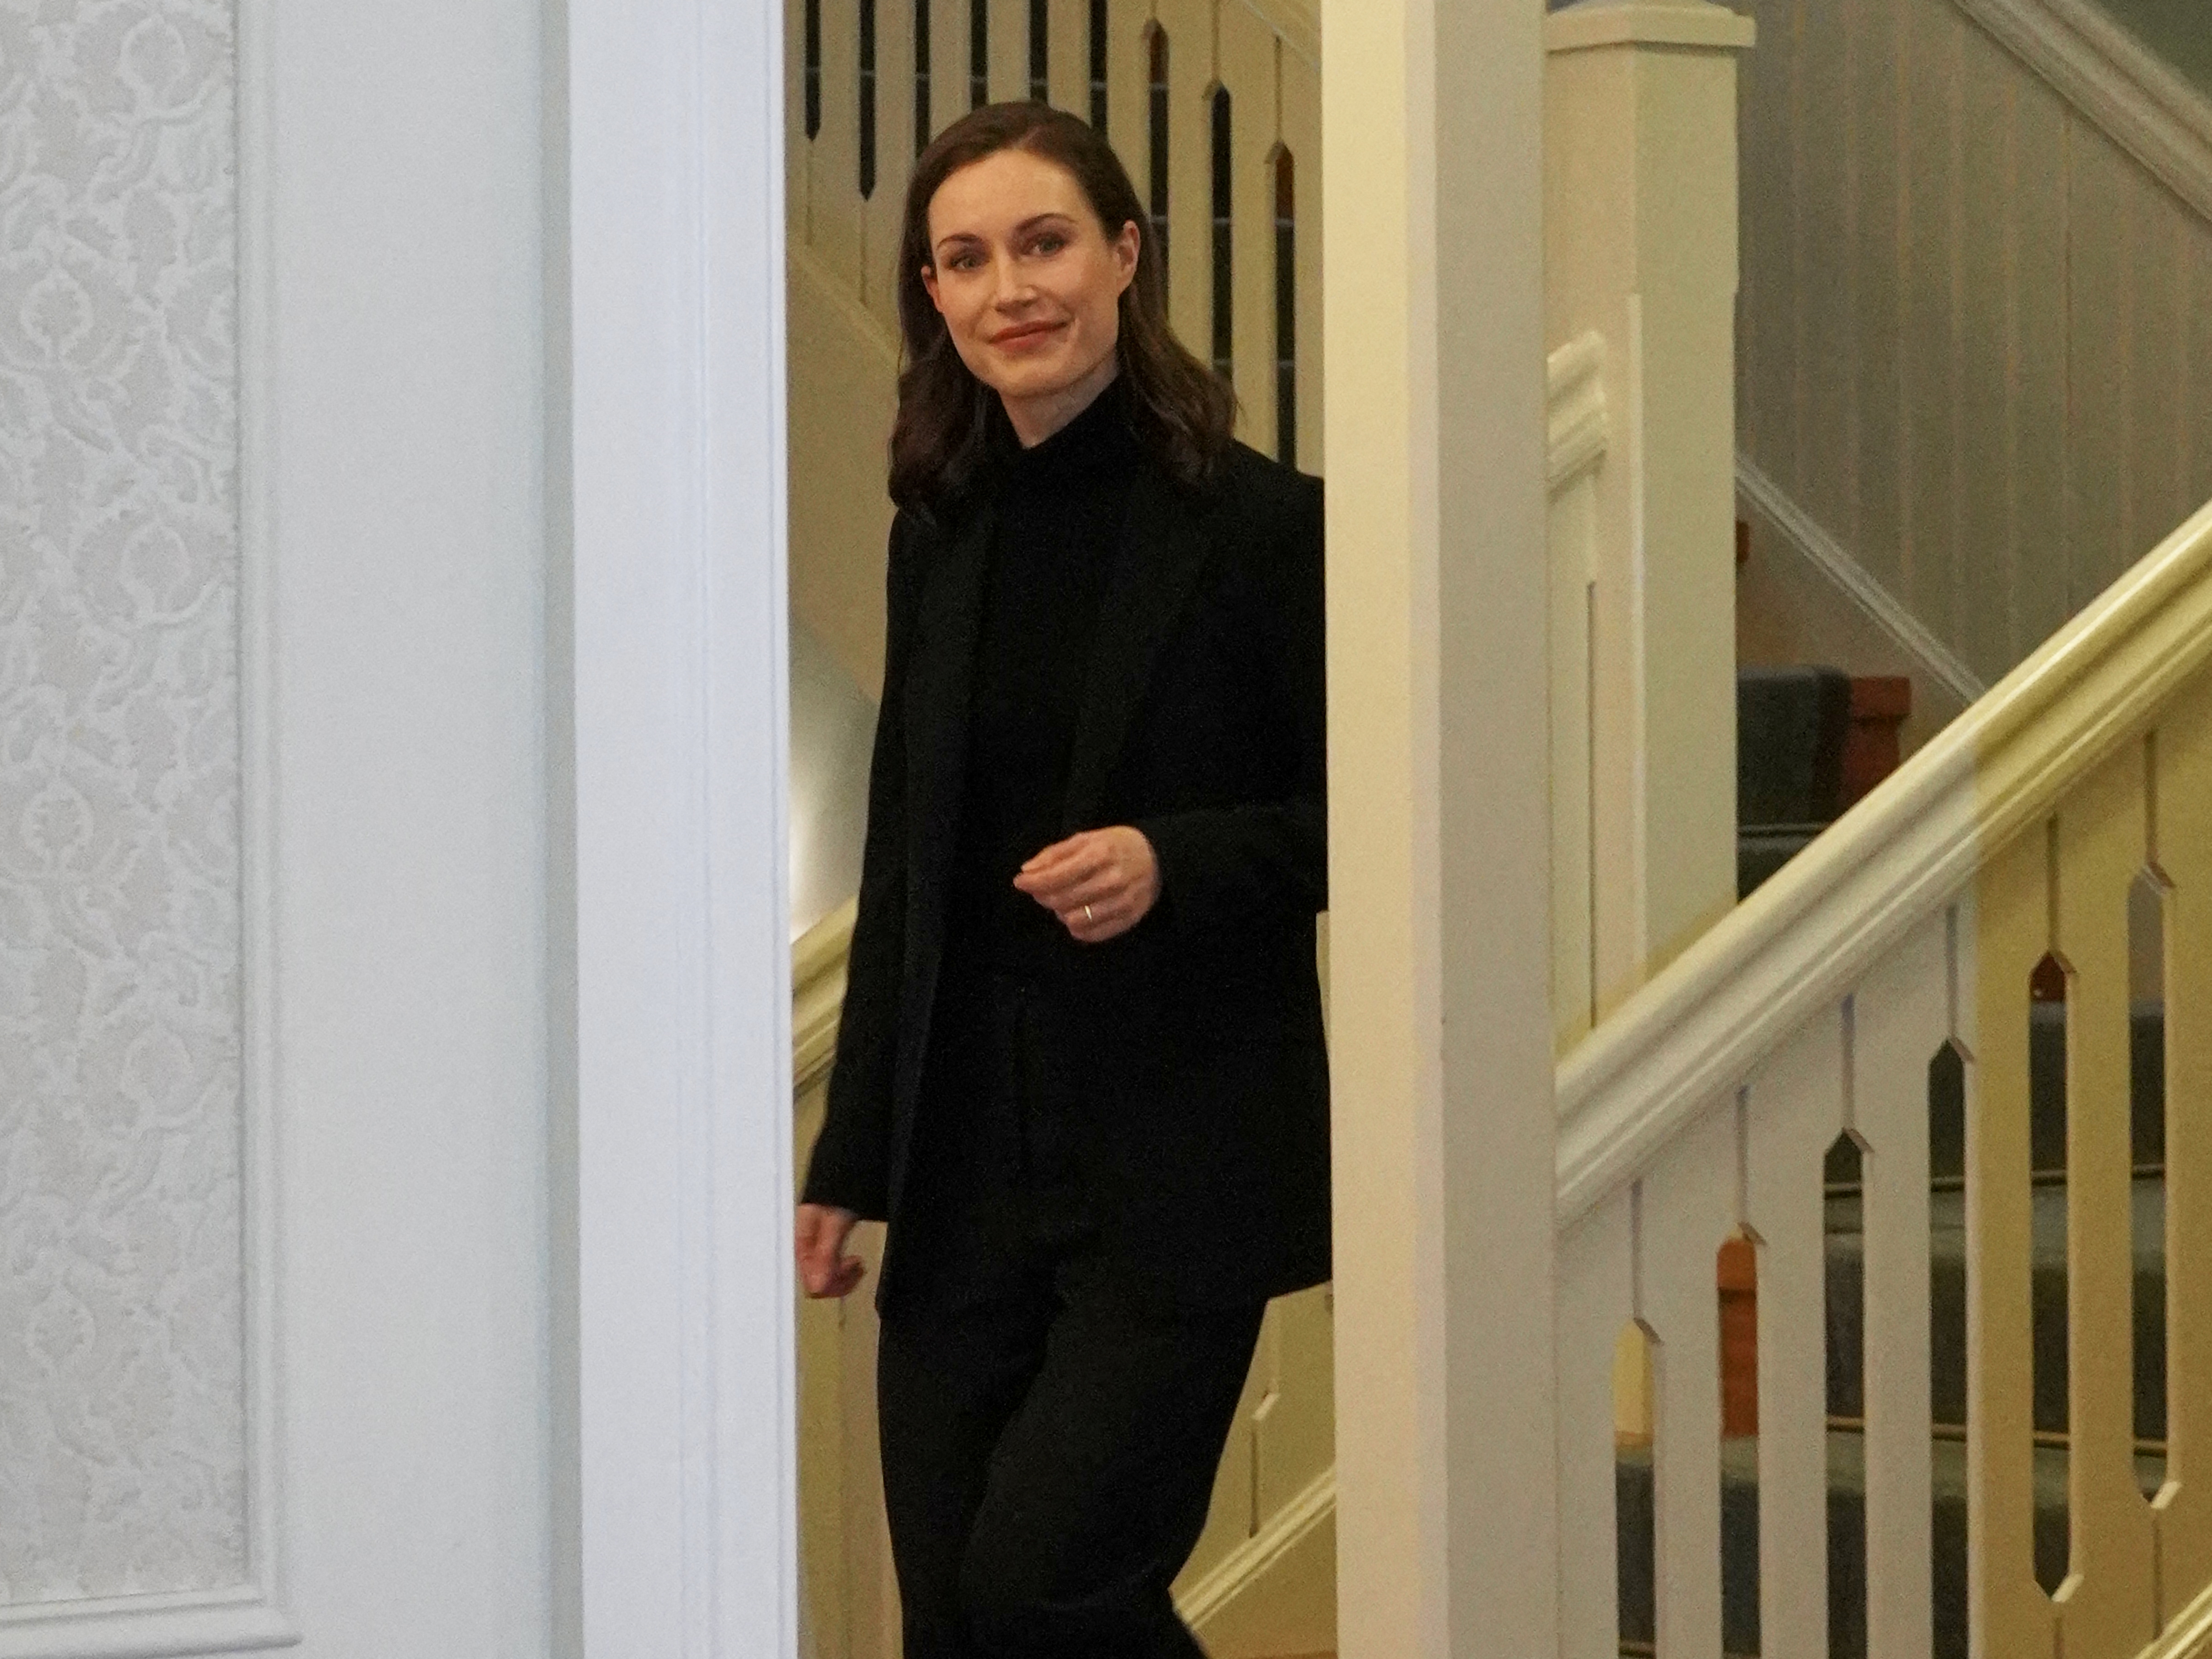 Finland's PM Marin is pictured at her official residence, Kesaranta, in Helsinki